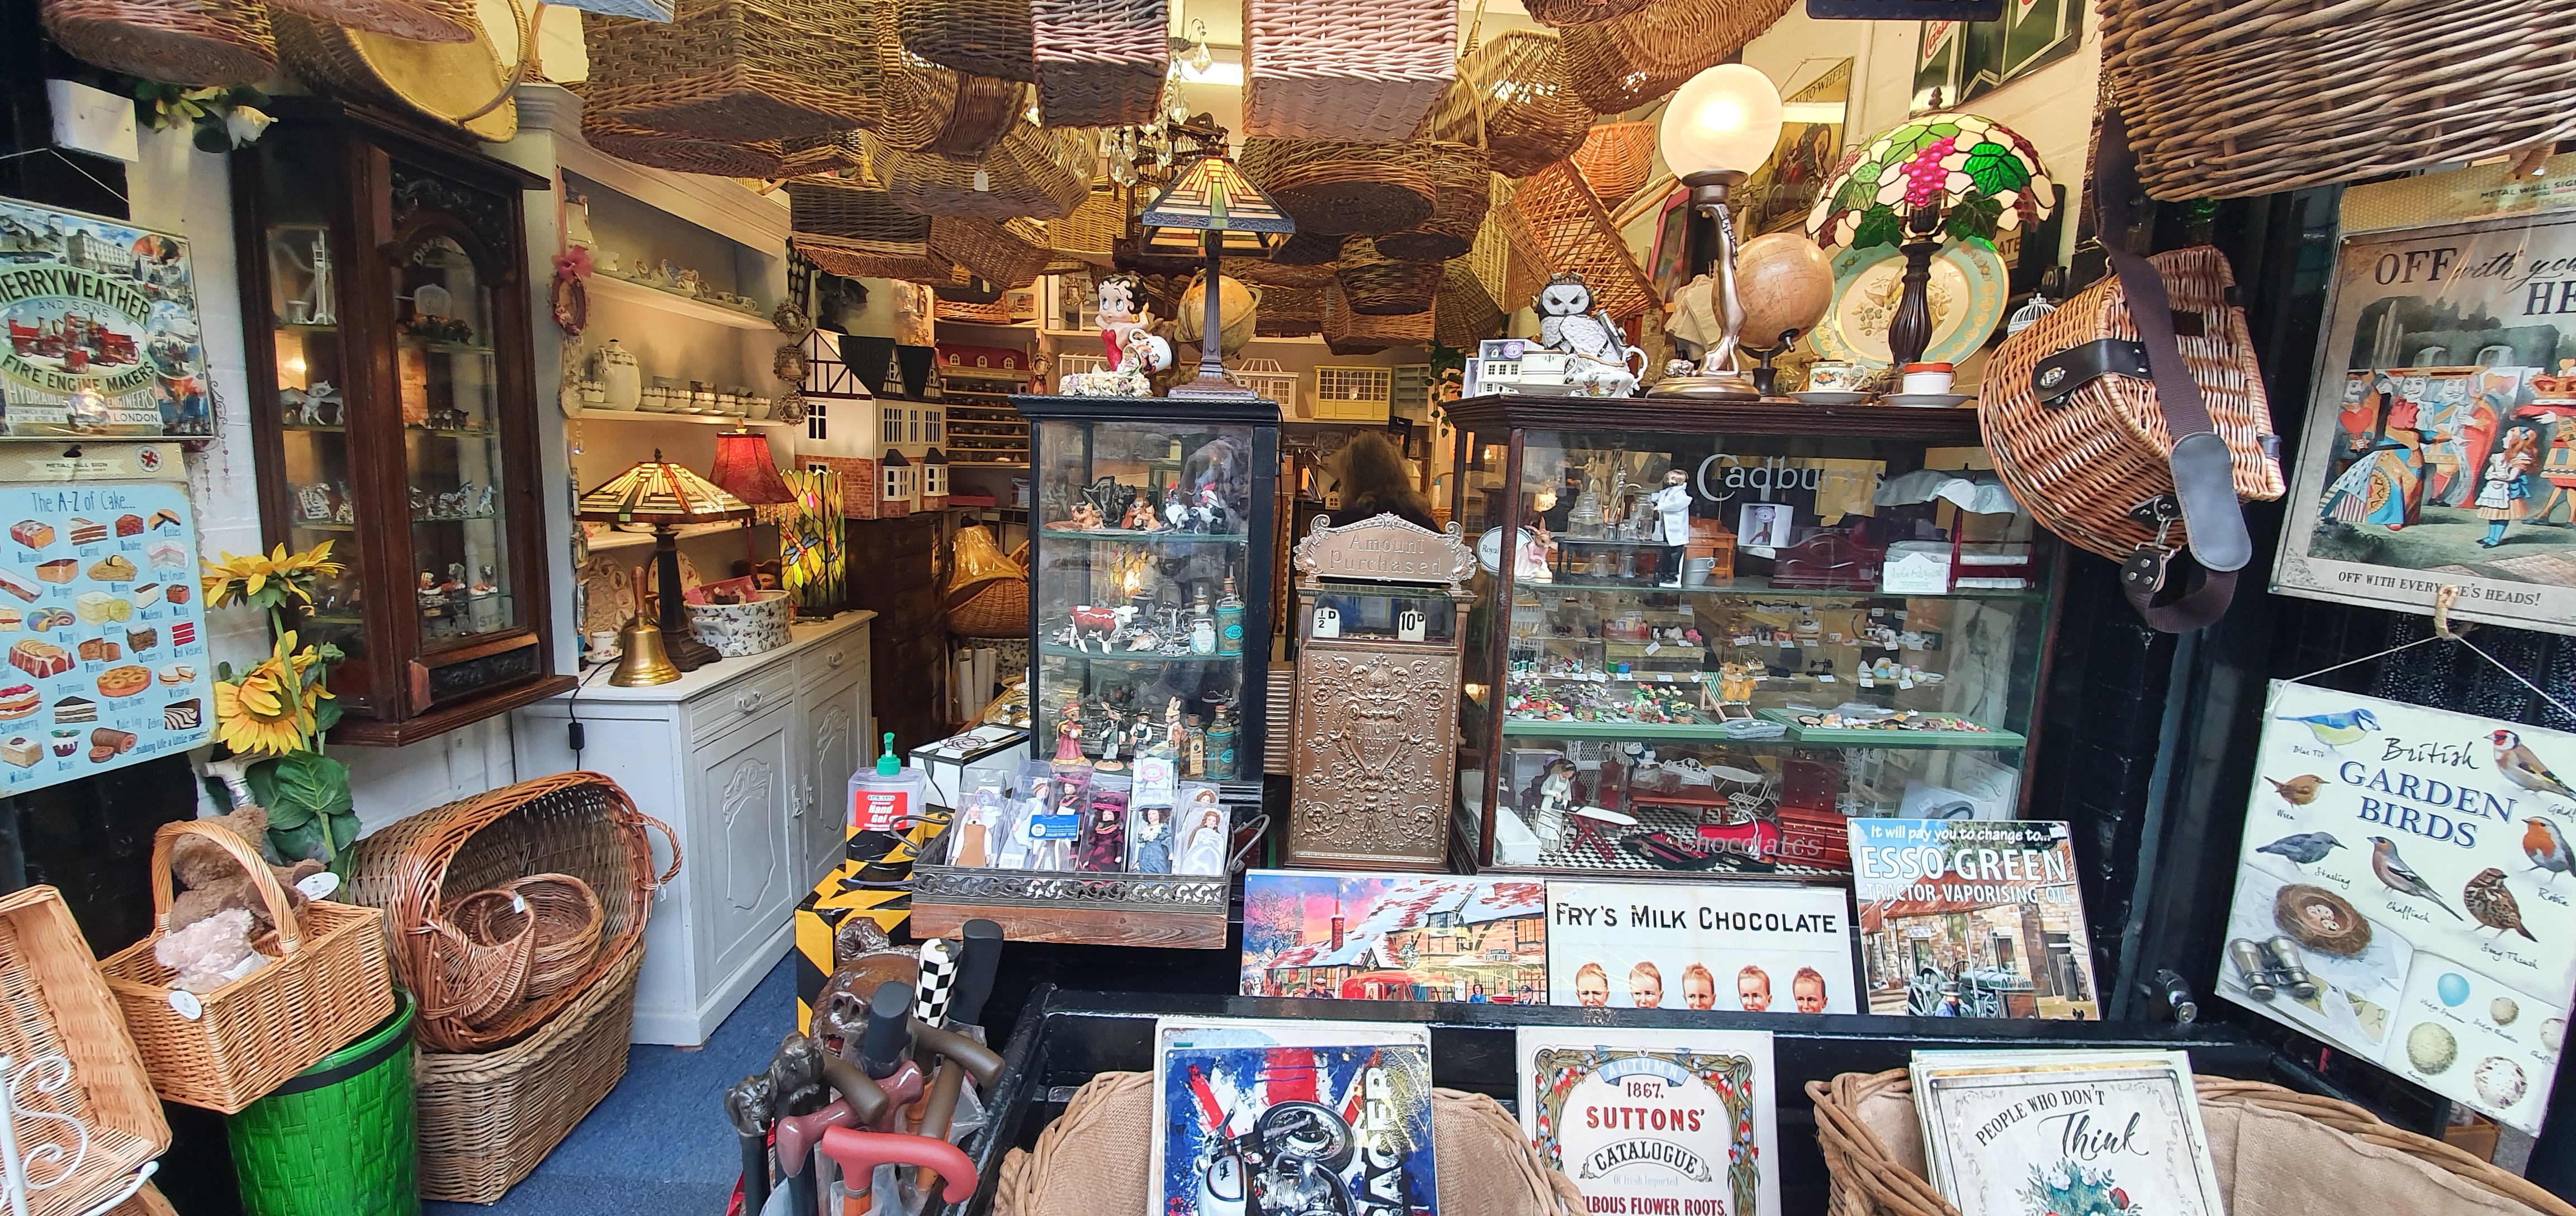 Antiques and wall signs at stall inside Butter Market, Leek, Stoke-on-Trent